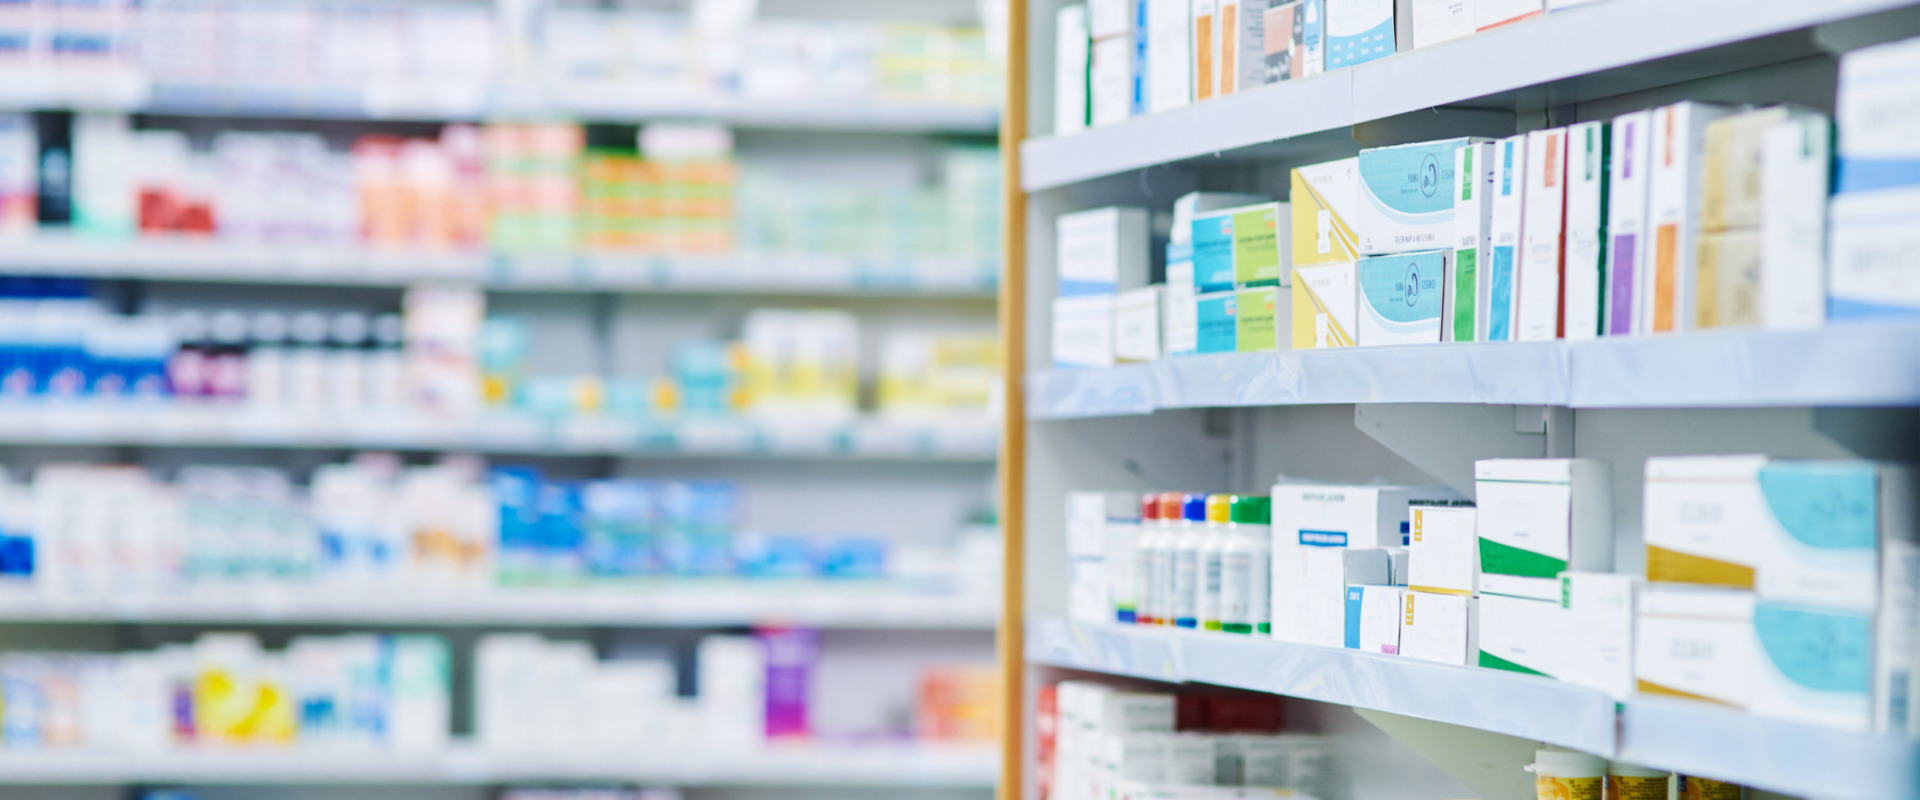 retail pharmacy shelves filled with medication